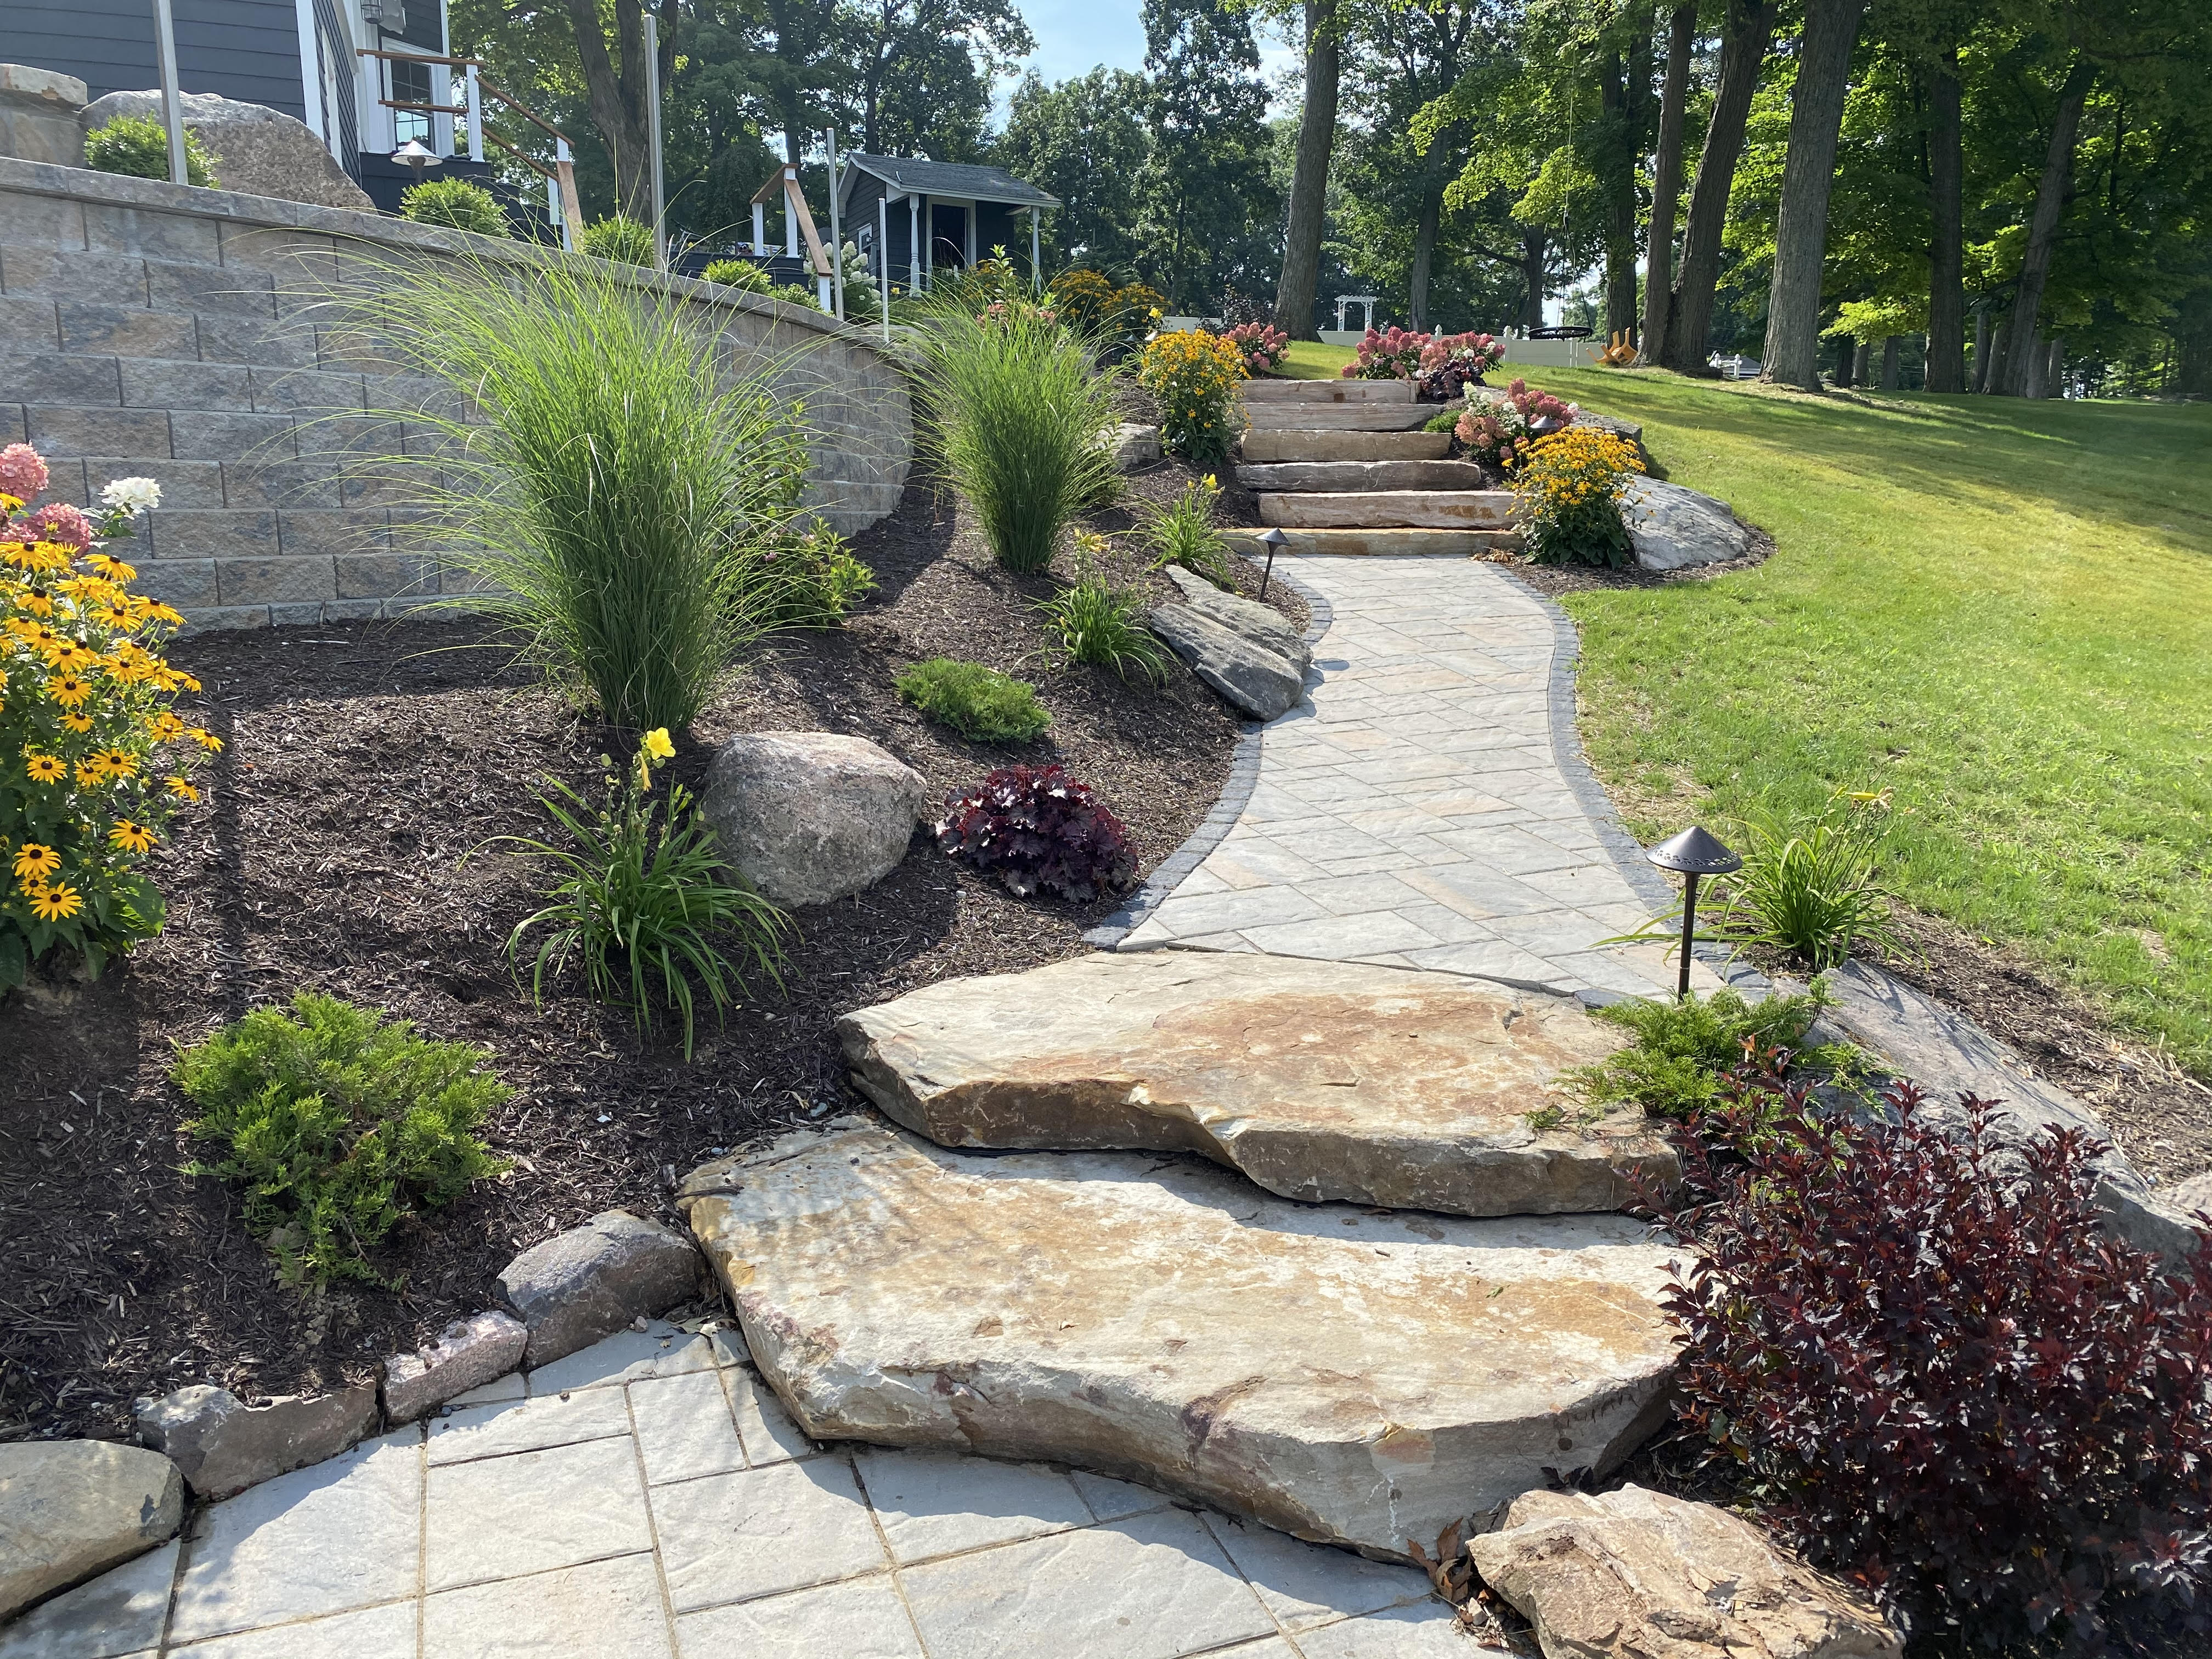 Sandstone Stairs Paver Walkway with Plantings